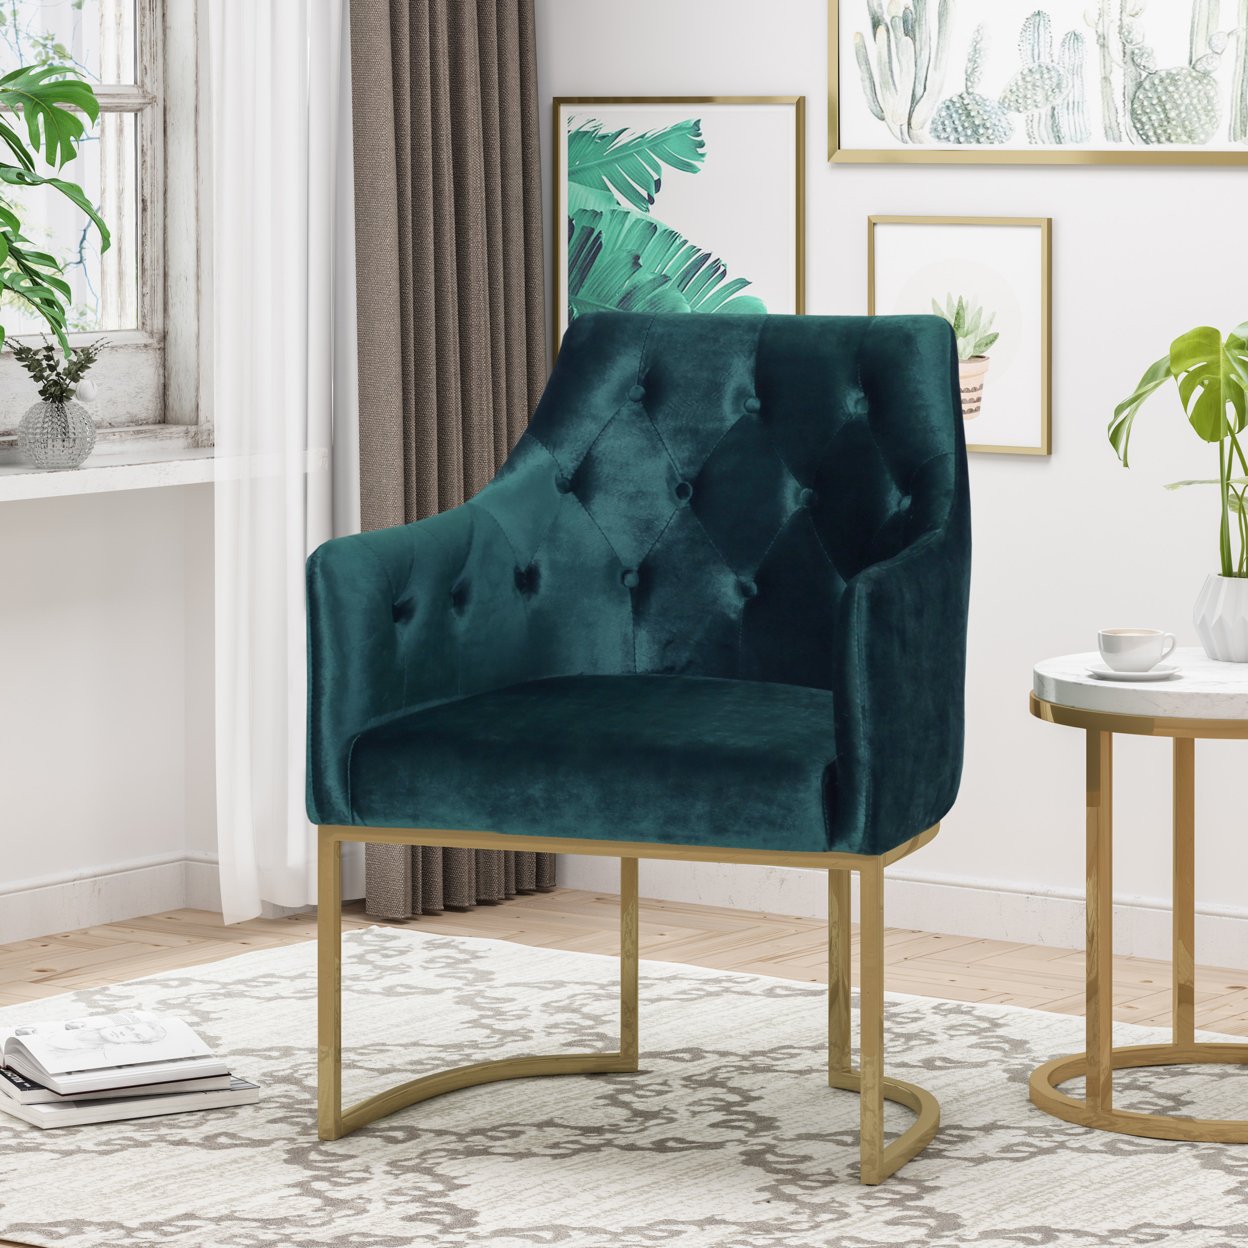 Fern Modern Tufted Glam Accent Chair With Velvet Cushions And U-Shaped Base - Black + Gold